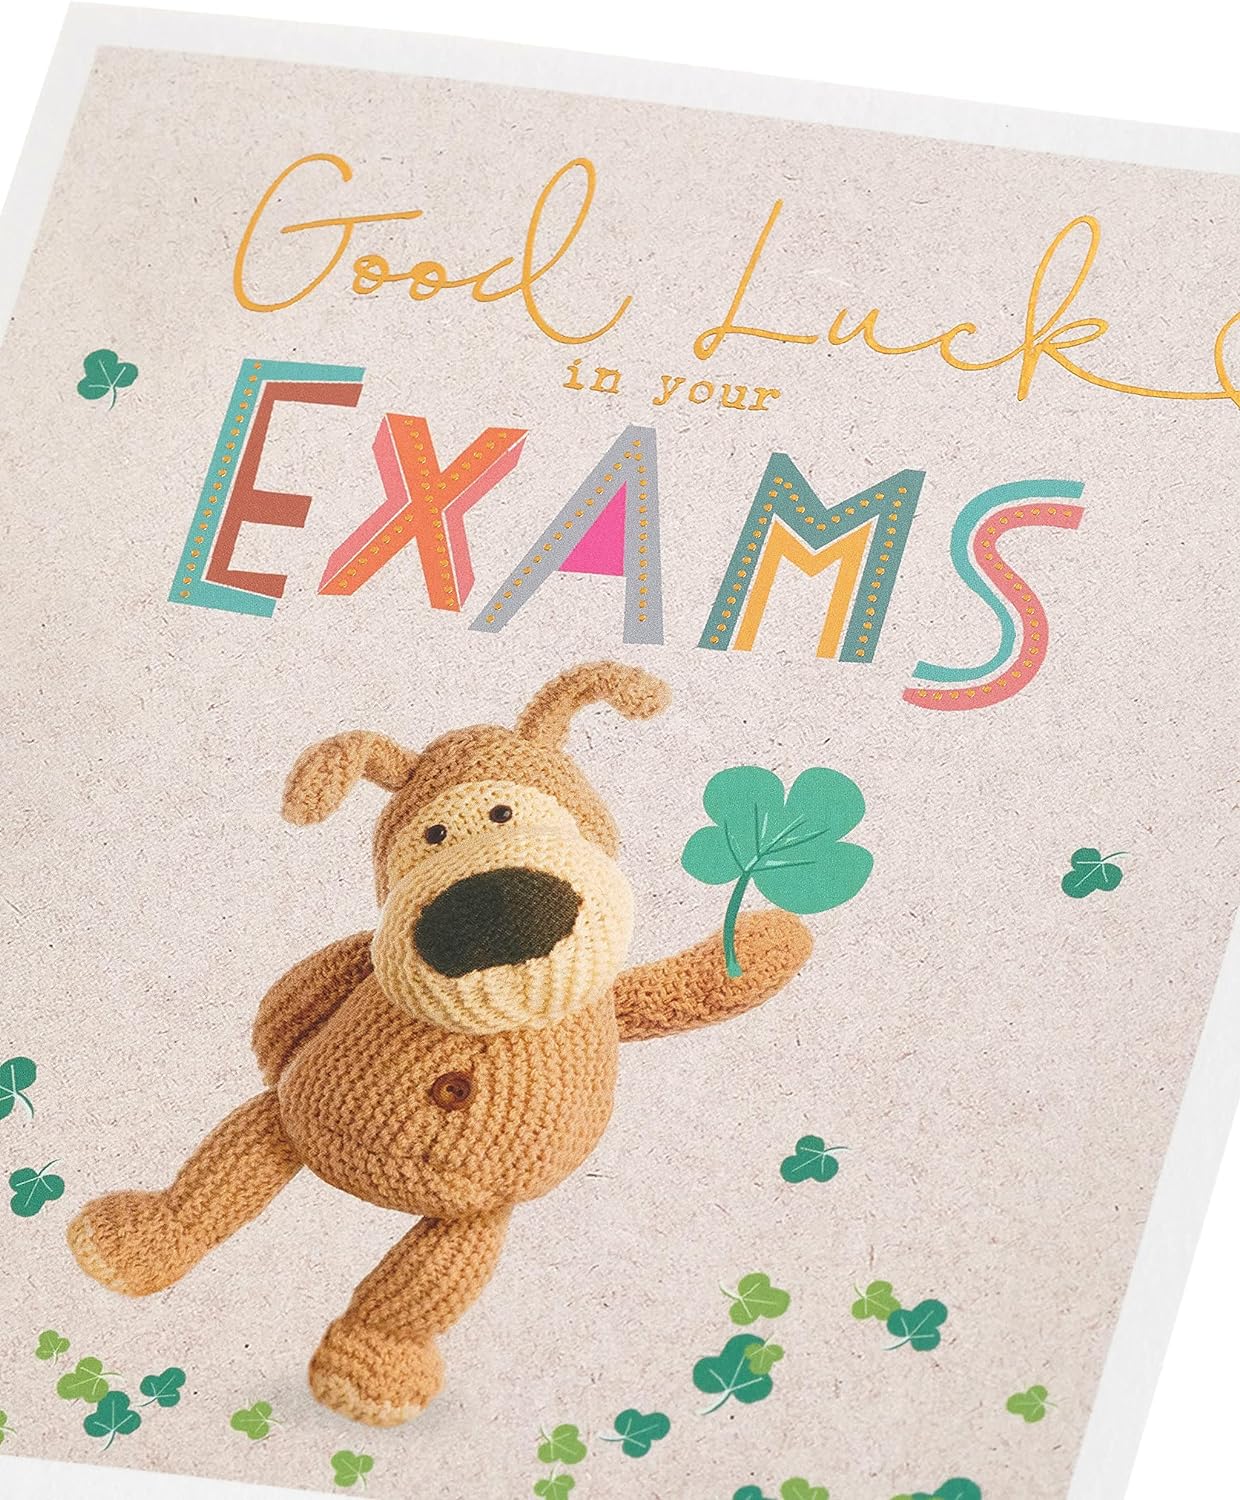 Boofle Good Luck In Your Exams Card